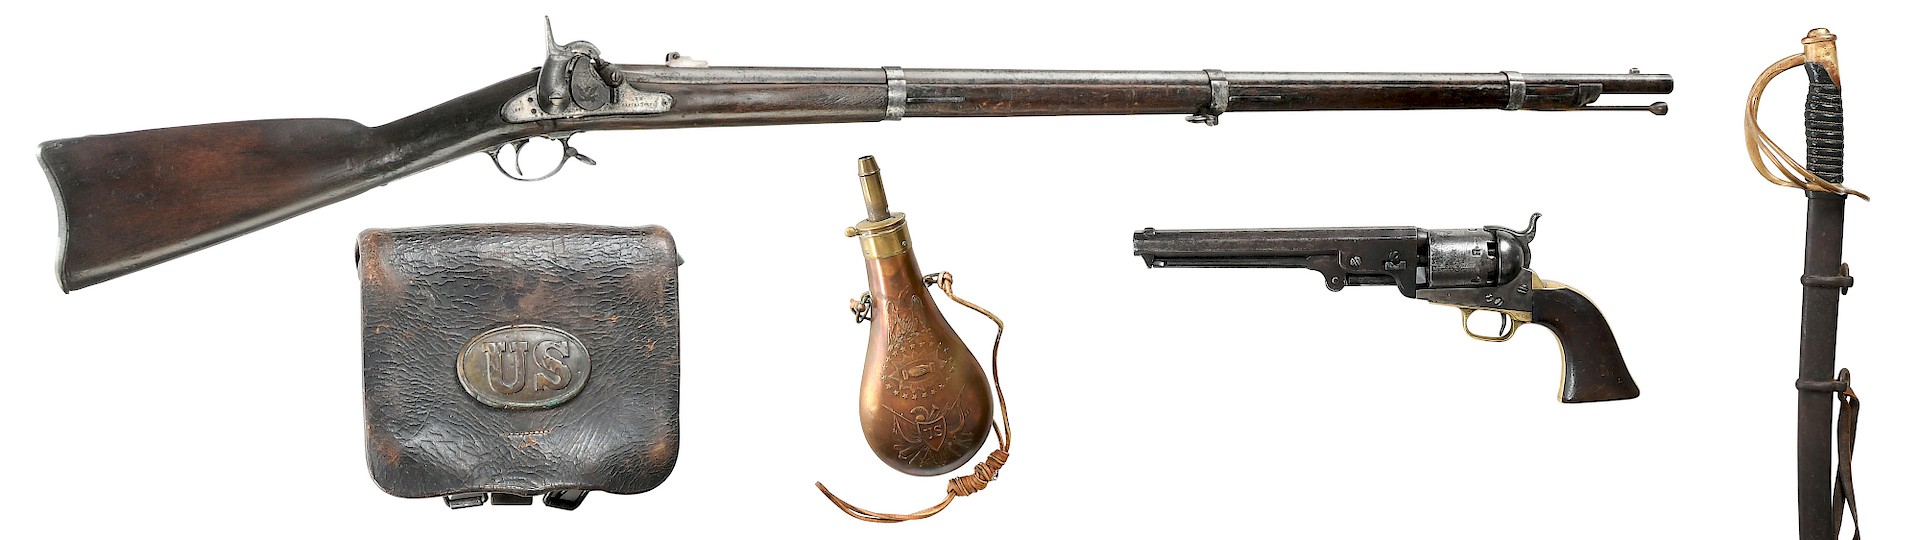 Historic Firearms and Militaria Auction by Brunk Auctions